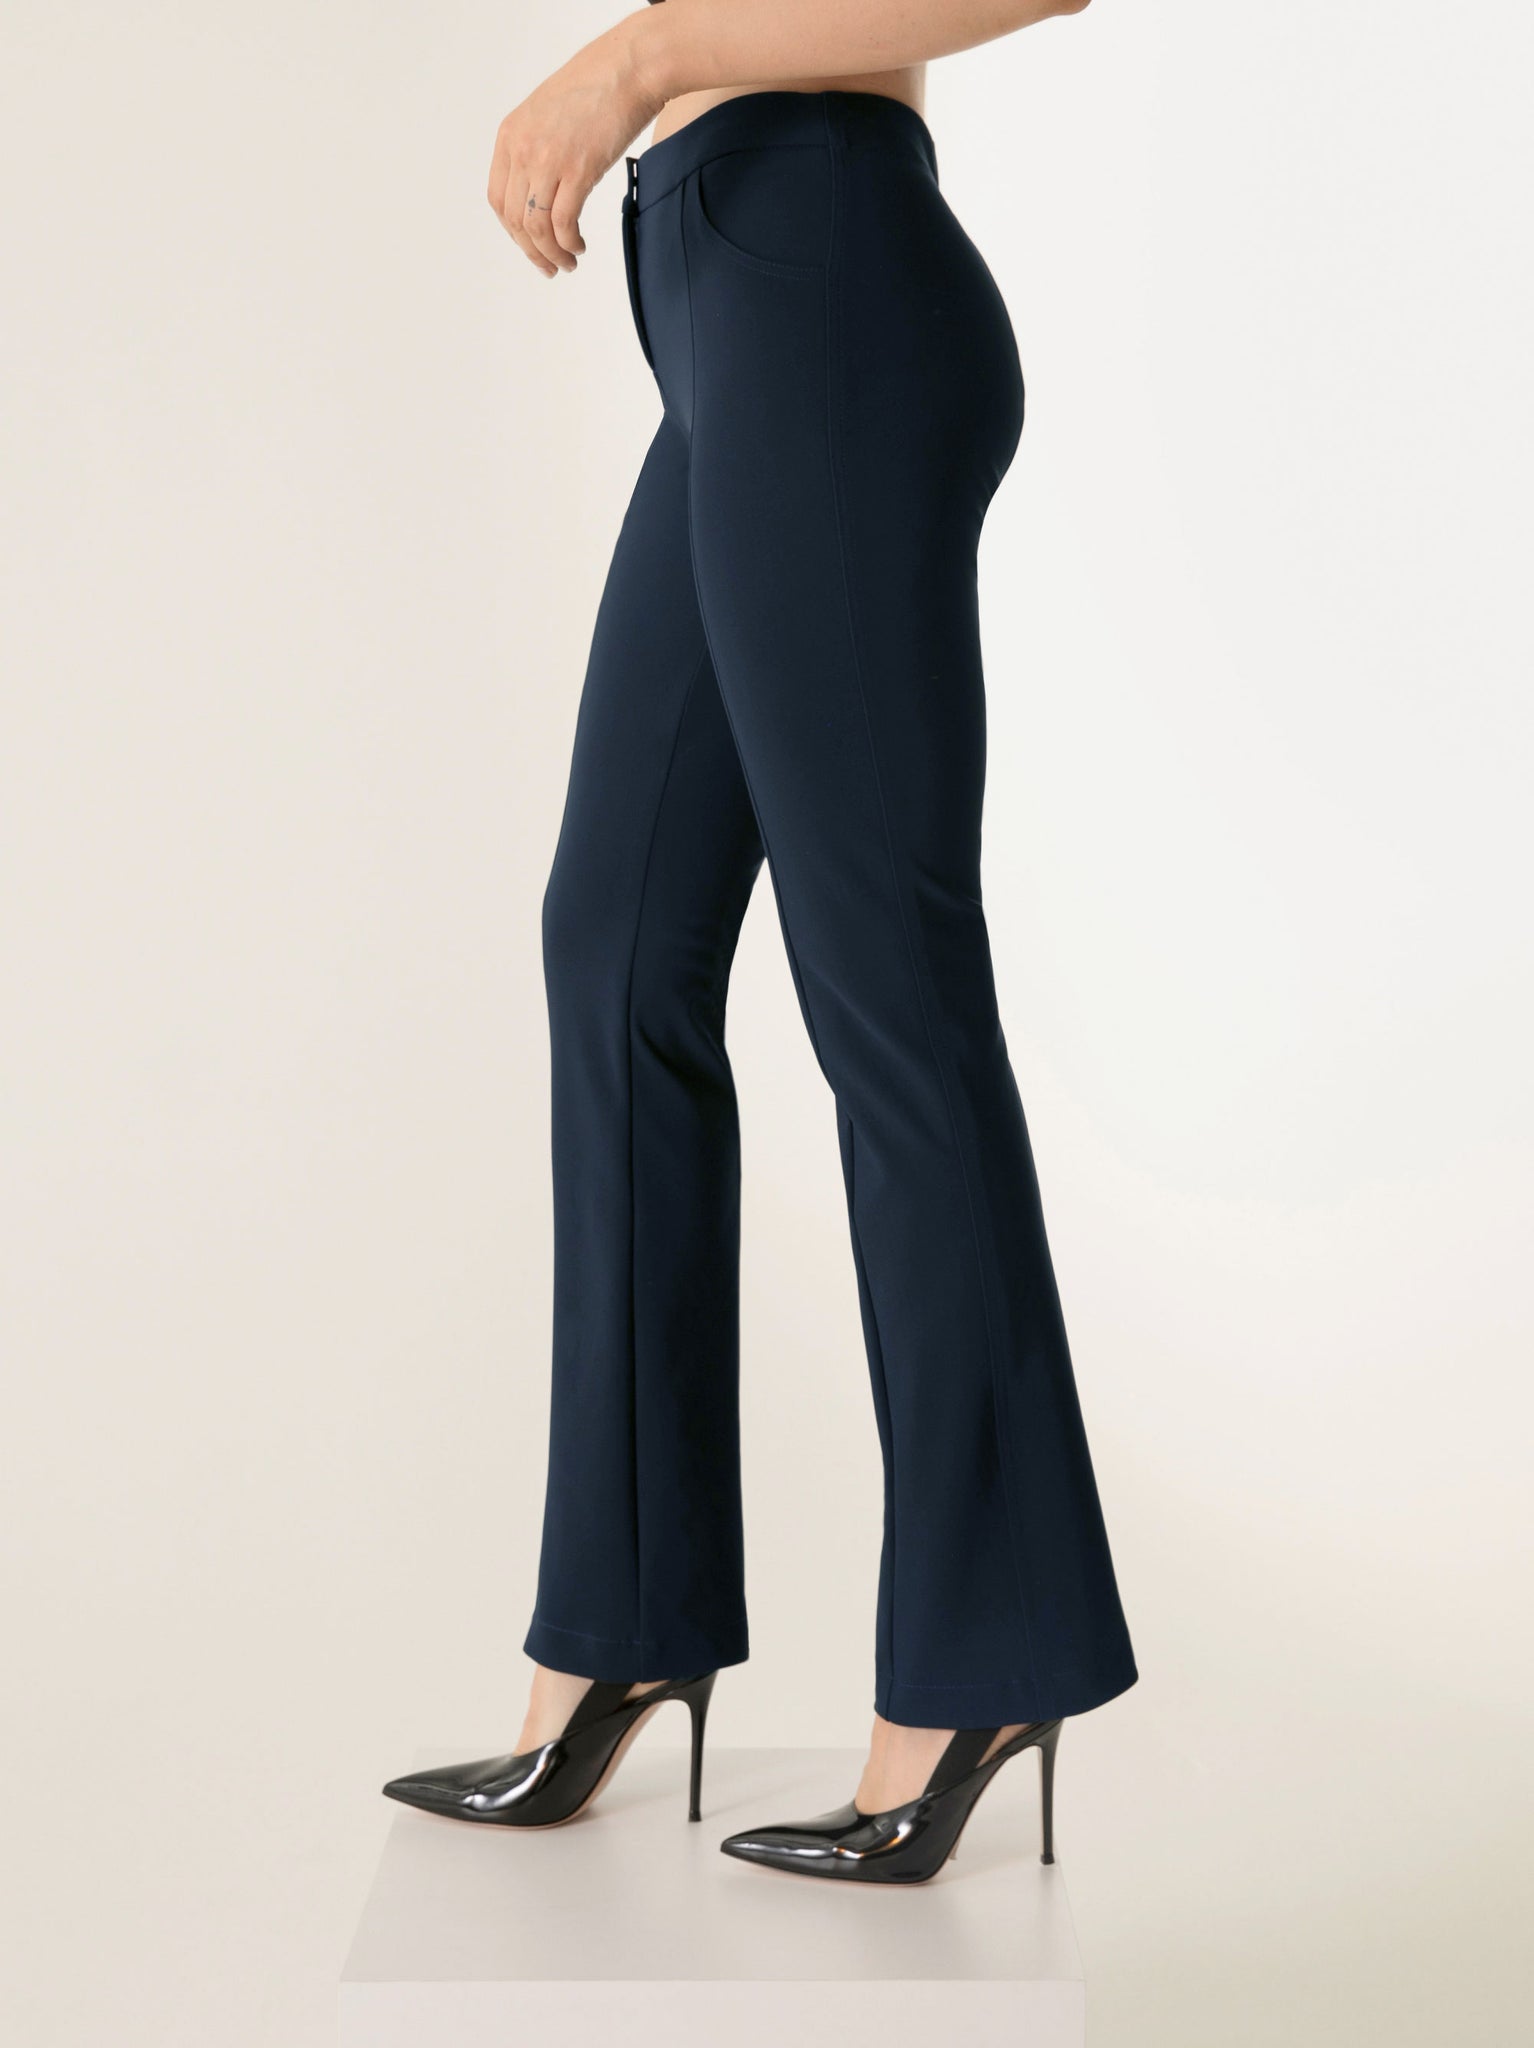 Dare to Flare Pants in Navy – Project Angels Boutique, LLC